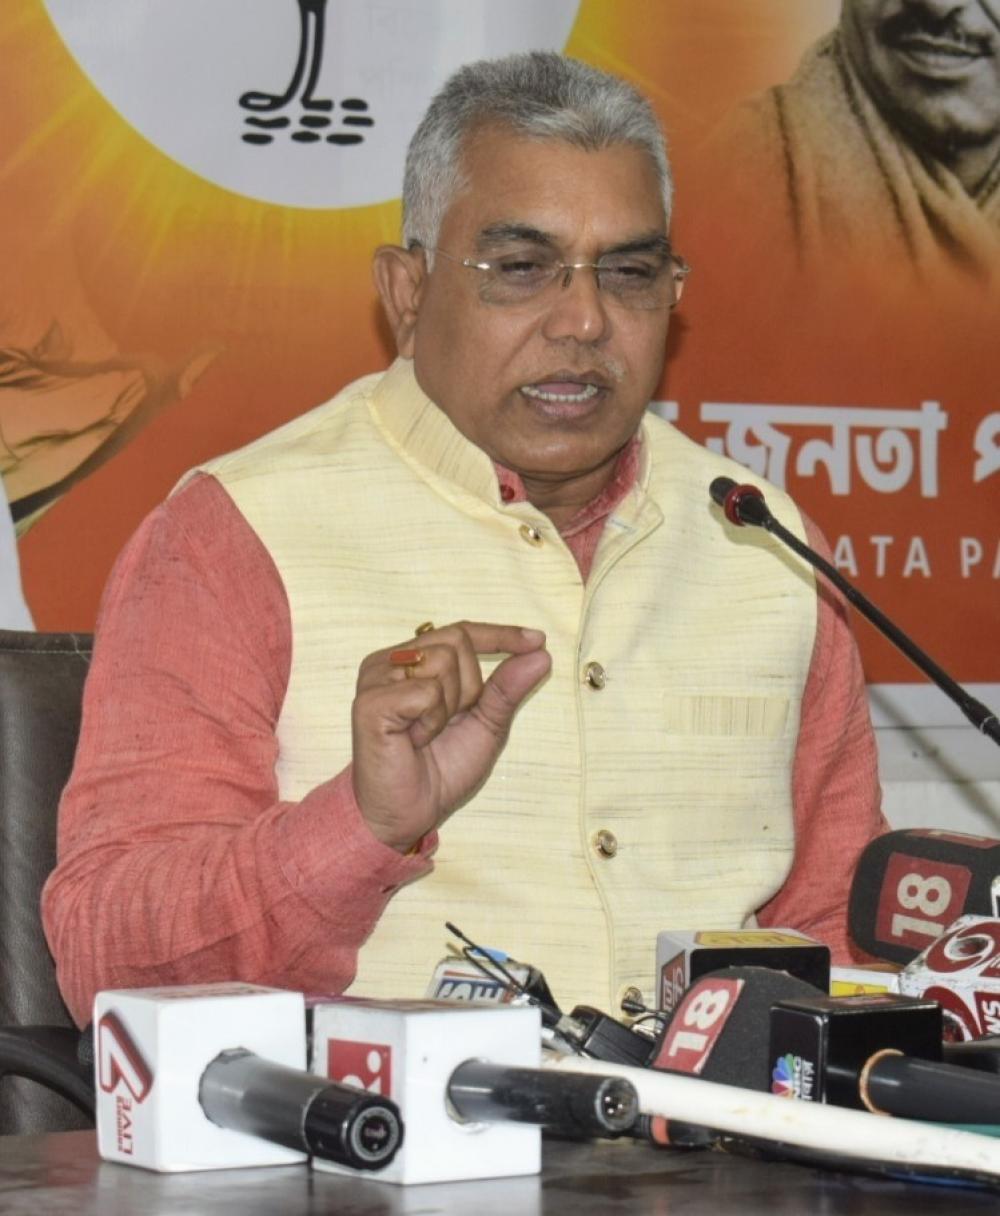 The Weekend Leader - Administrations fear led to reverse exodus in Bengal: Dilip Ghosh